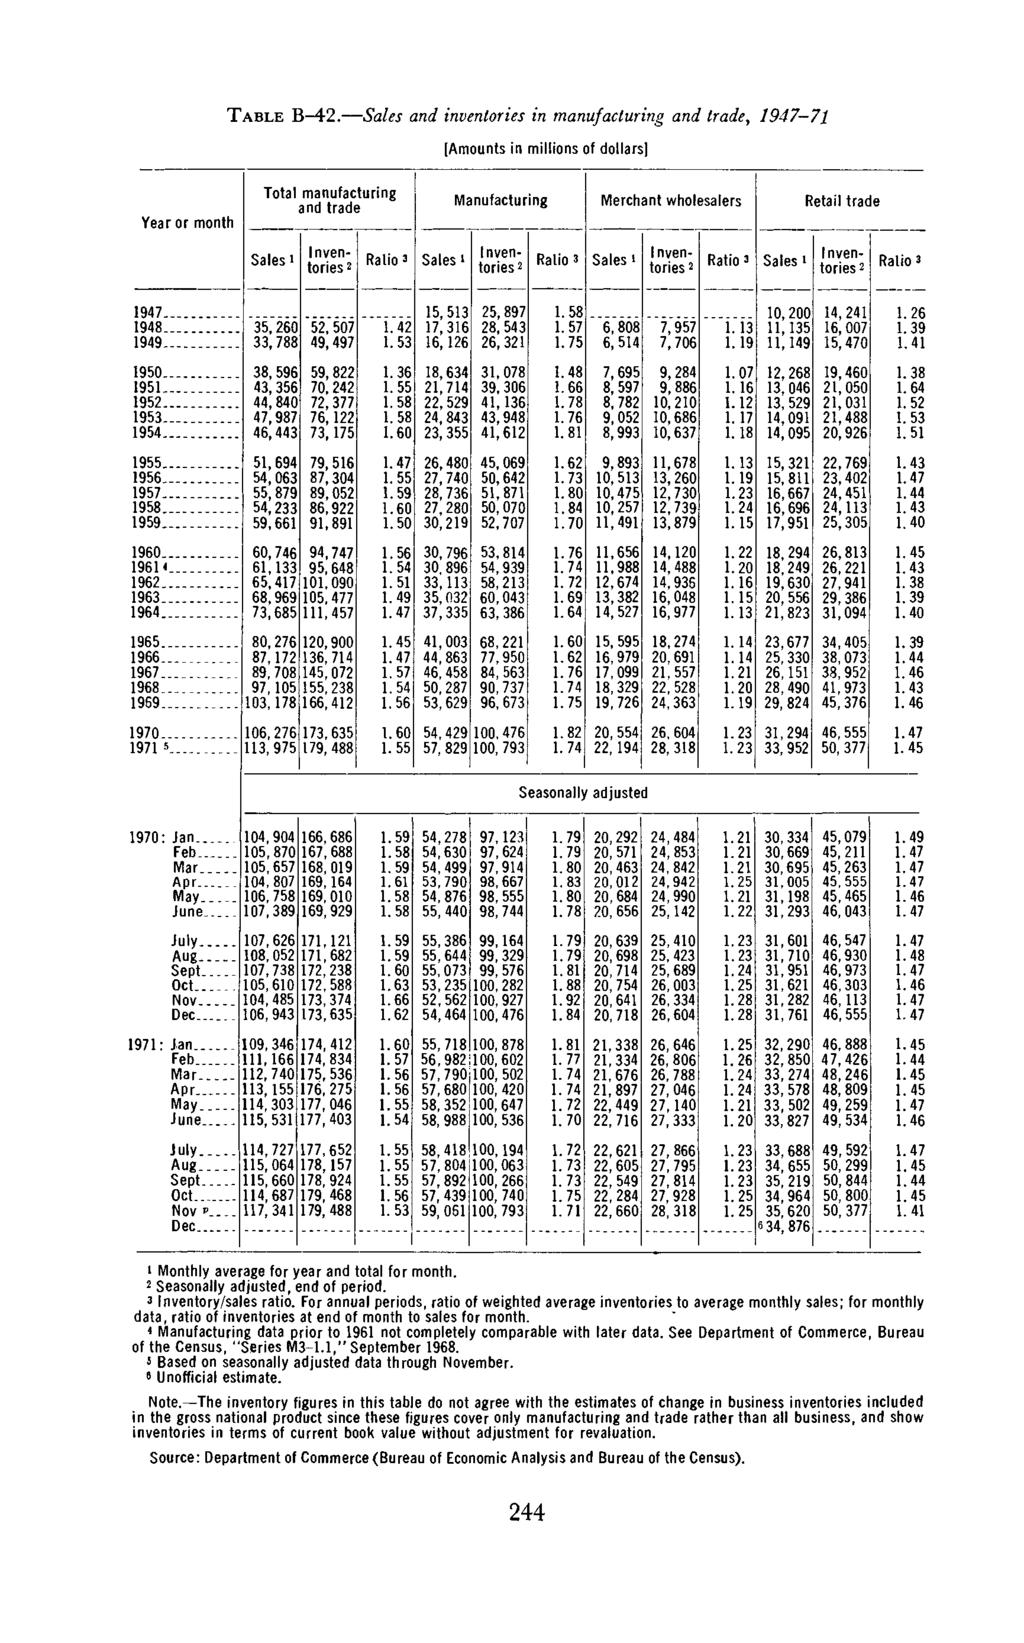 197 TABLE B-4. and inventories in manufacturing, 1947-71 1947-1948.. 1949-35,60 5, 507 1.4 16,16 5, 897 8, 543 6,31 10,00 14,41 16, 007 1.6 1950